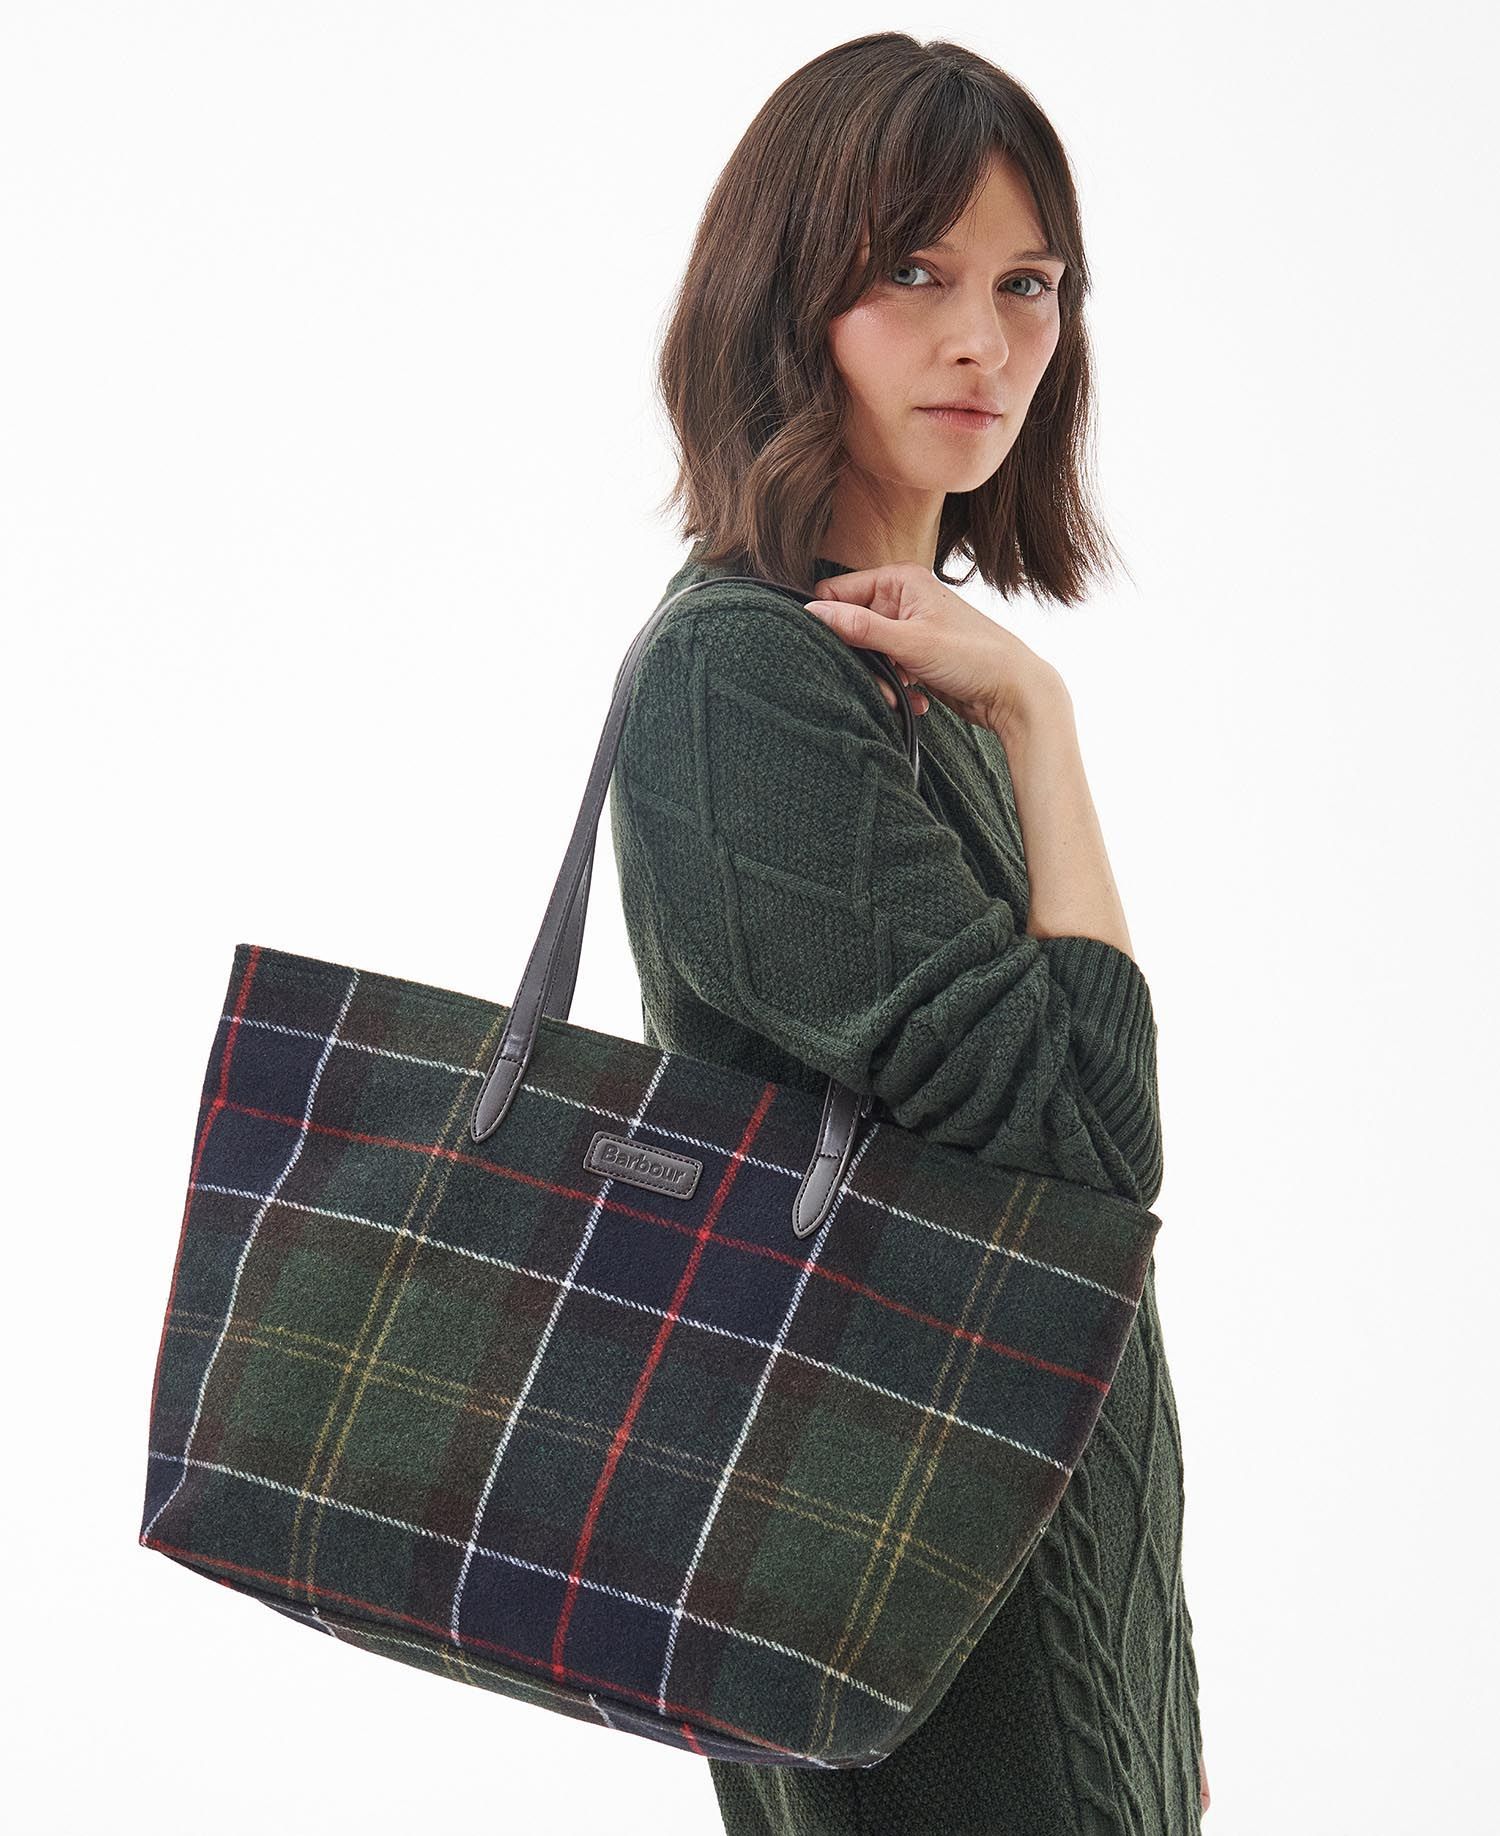 Anello Limited Edition British Style Plaid Pattern 2 Way Shoulder Tote Bag